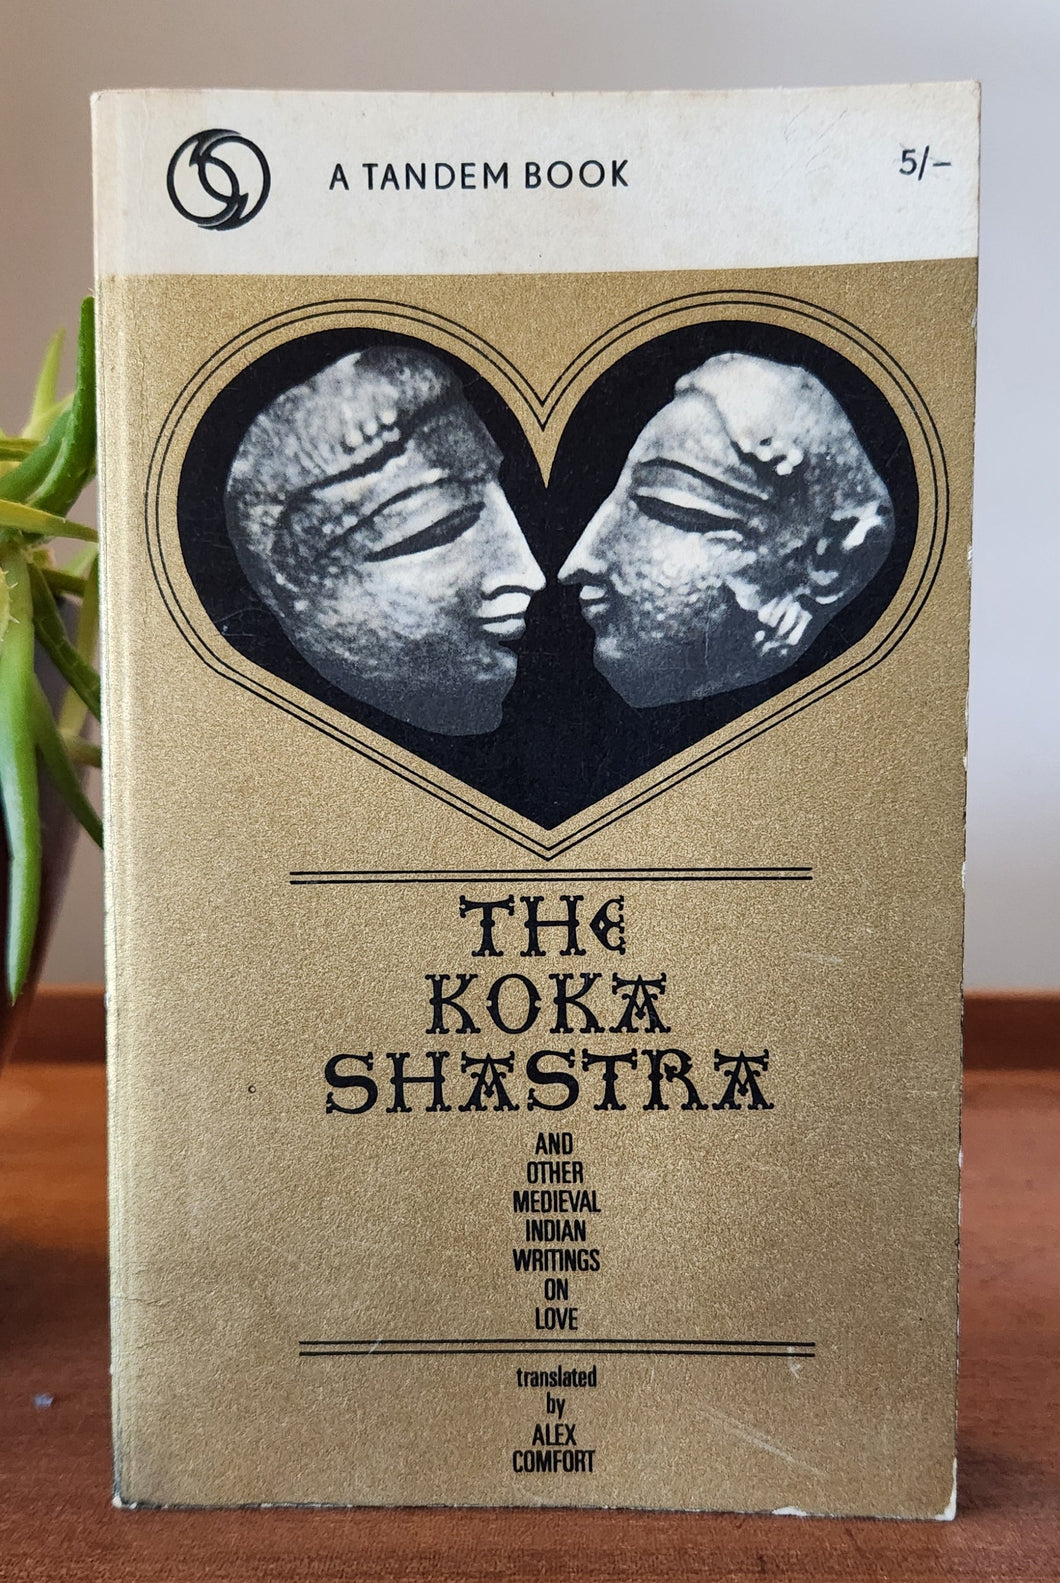 The Koka Shastra and Other Medieval Indian Writings on Love Translated by Alex Comfort